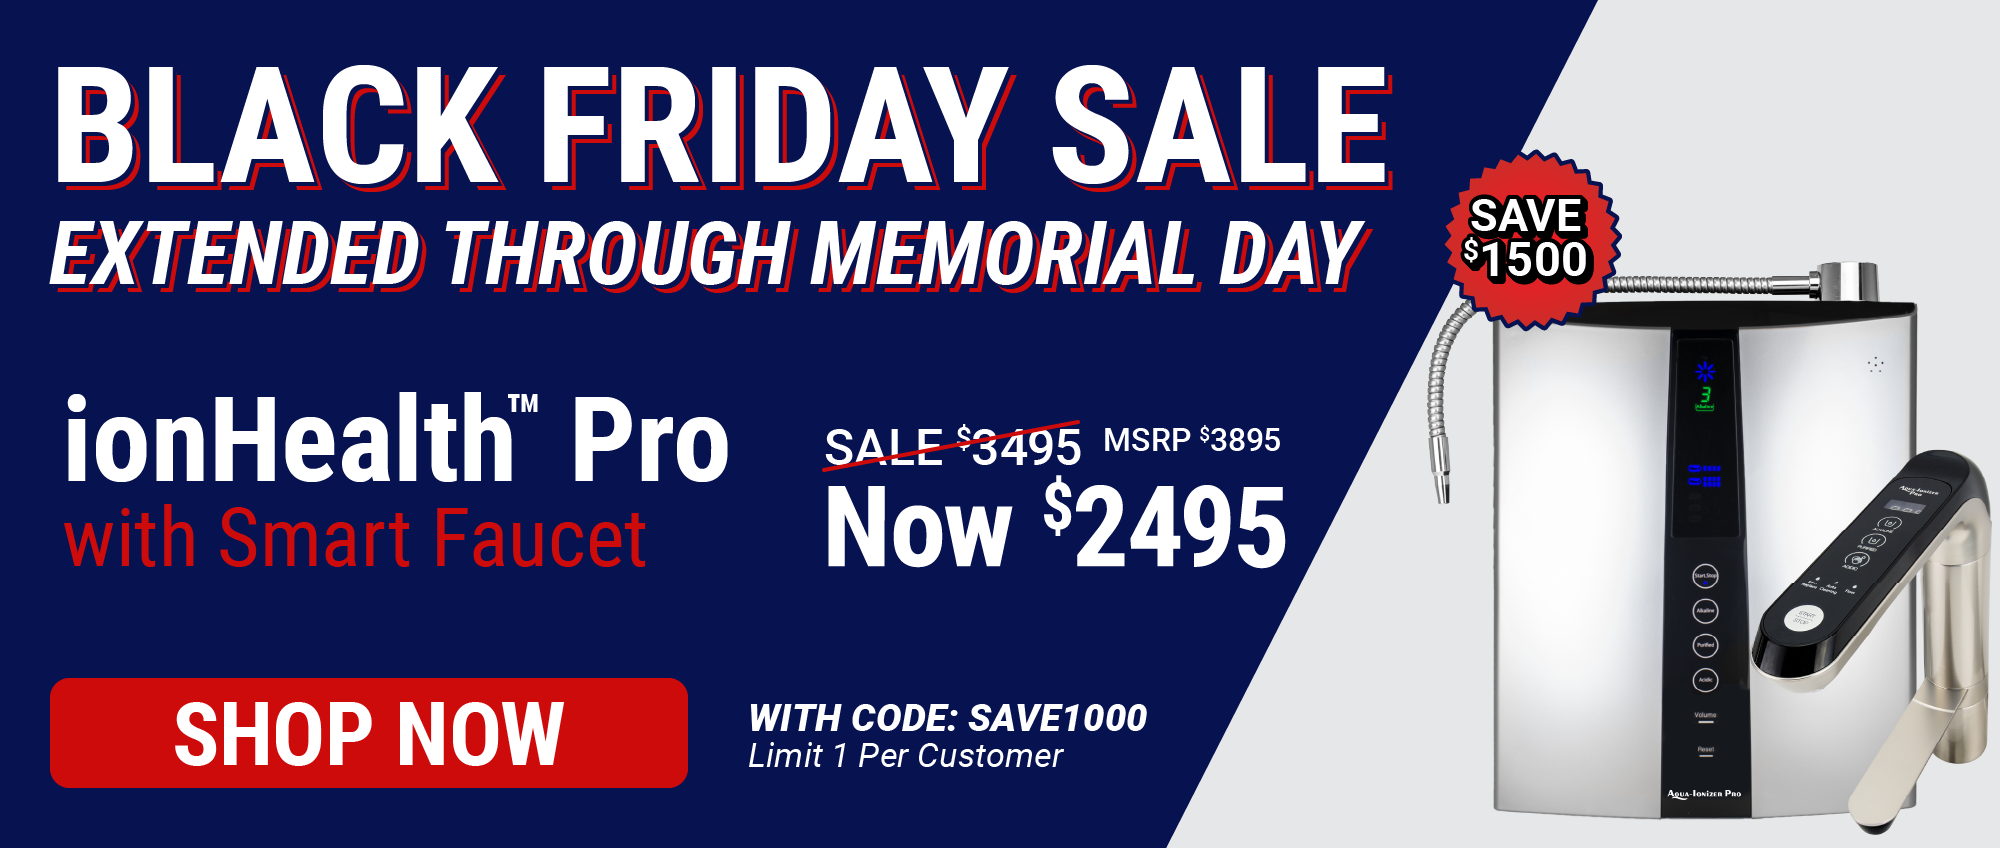 ionHealth Pro - Black Friday Sale  Extended Through Memorial Day